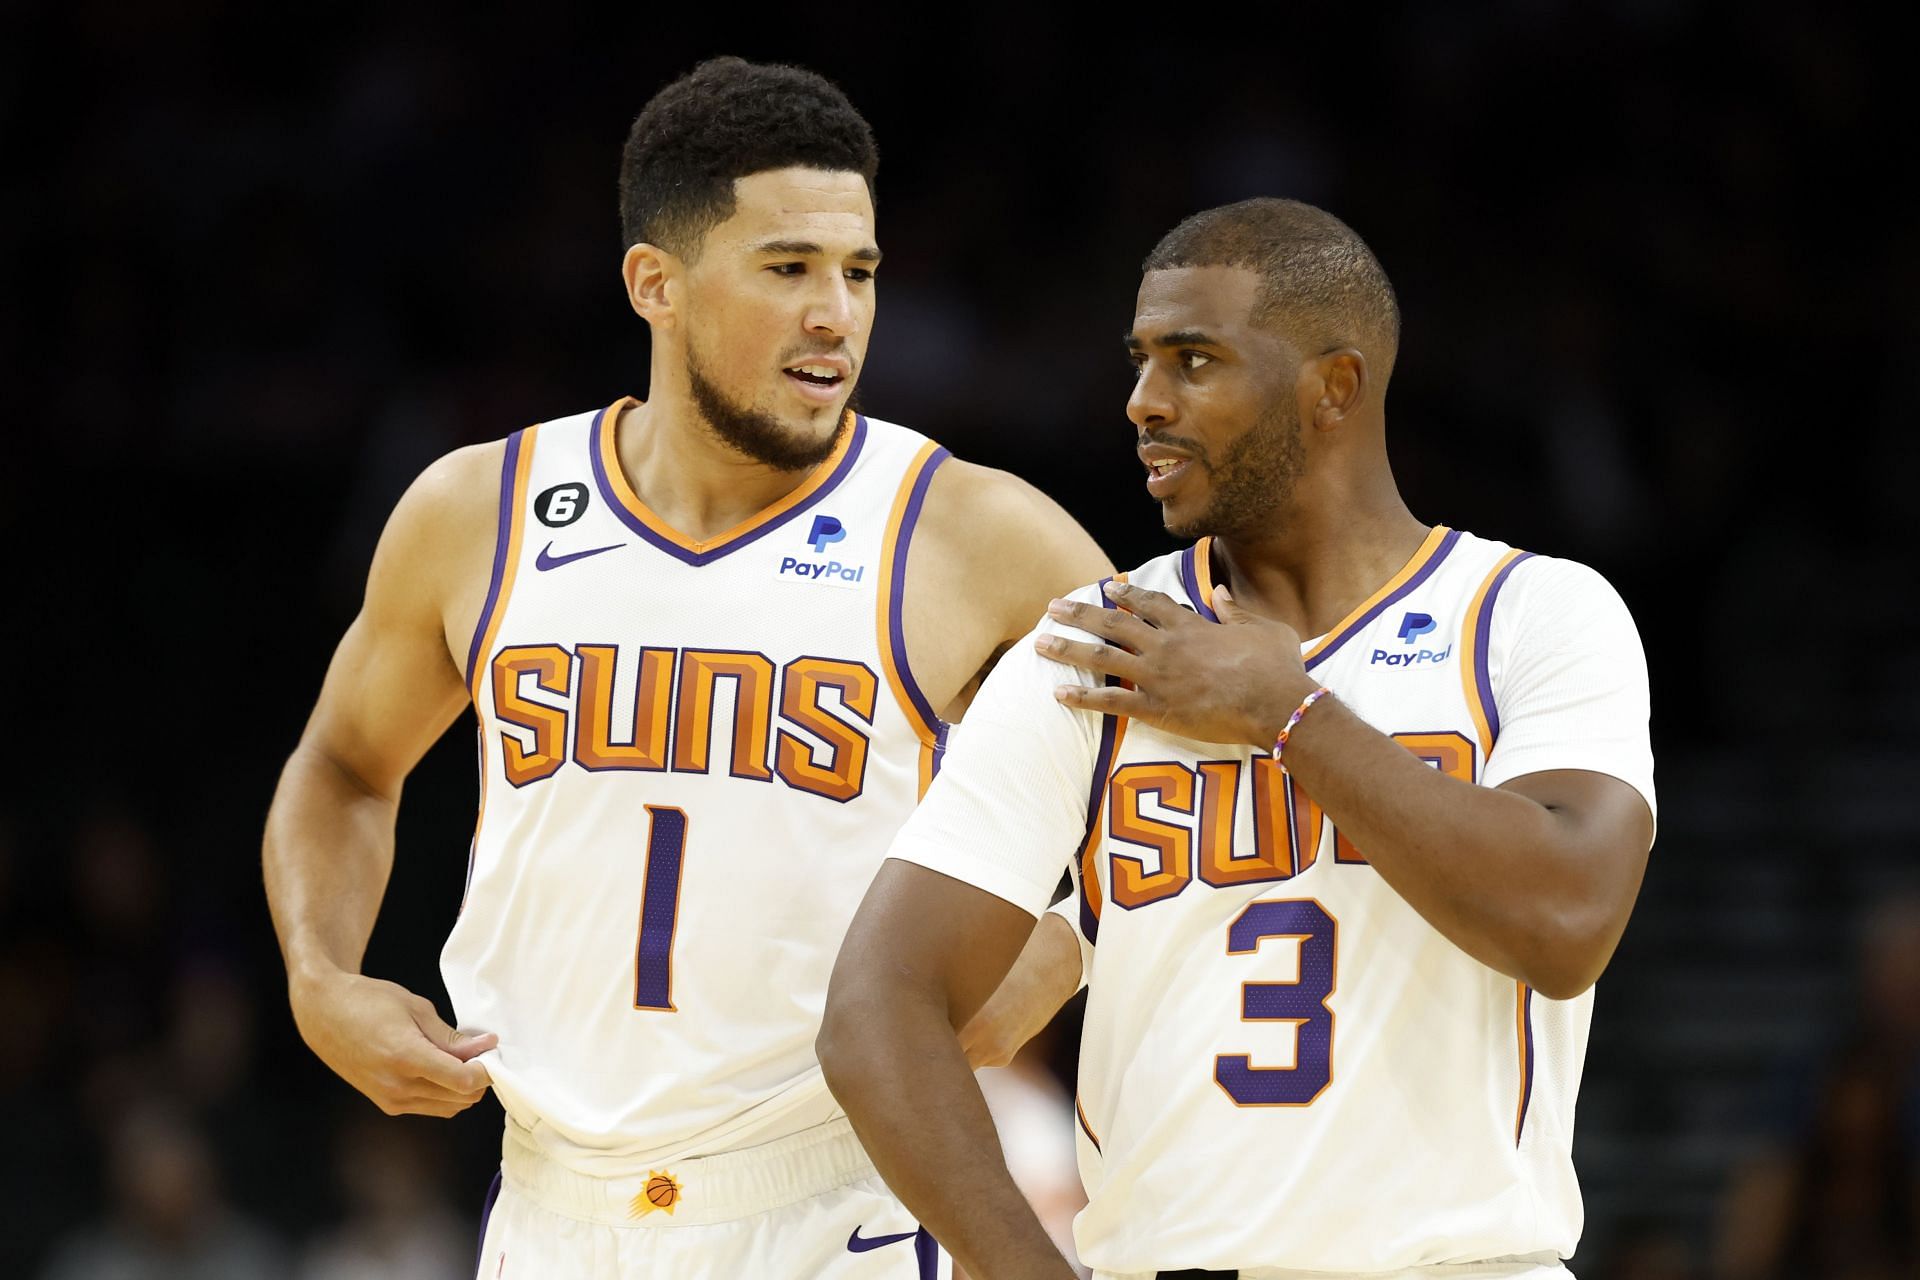 The Phoenix Suns could miss the playoffs if Chris Paul and Devin Booker are not fully healthy this season.